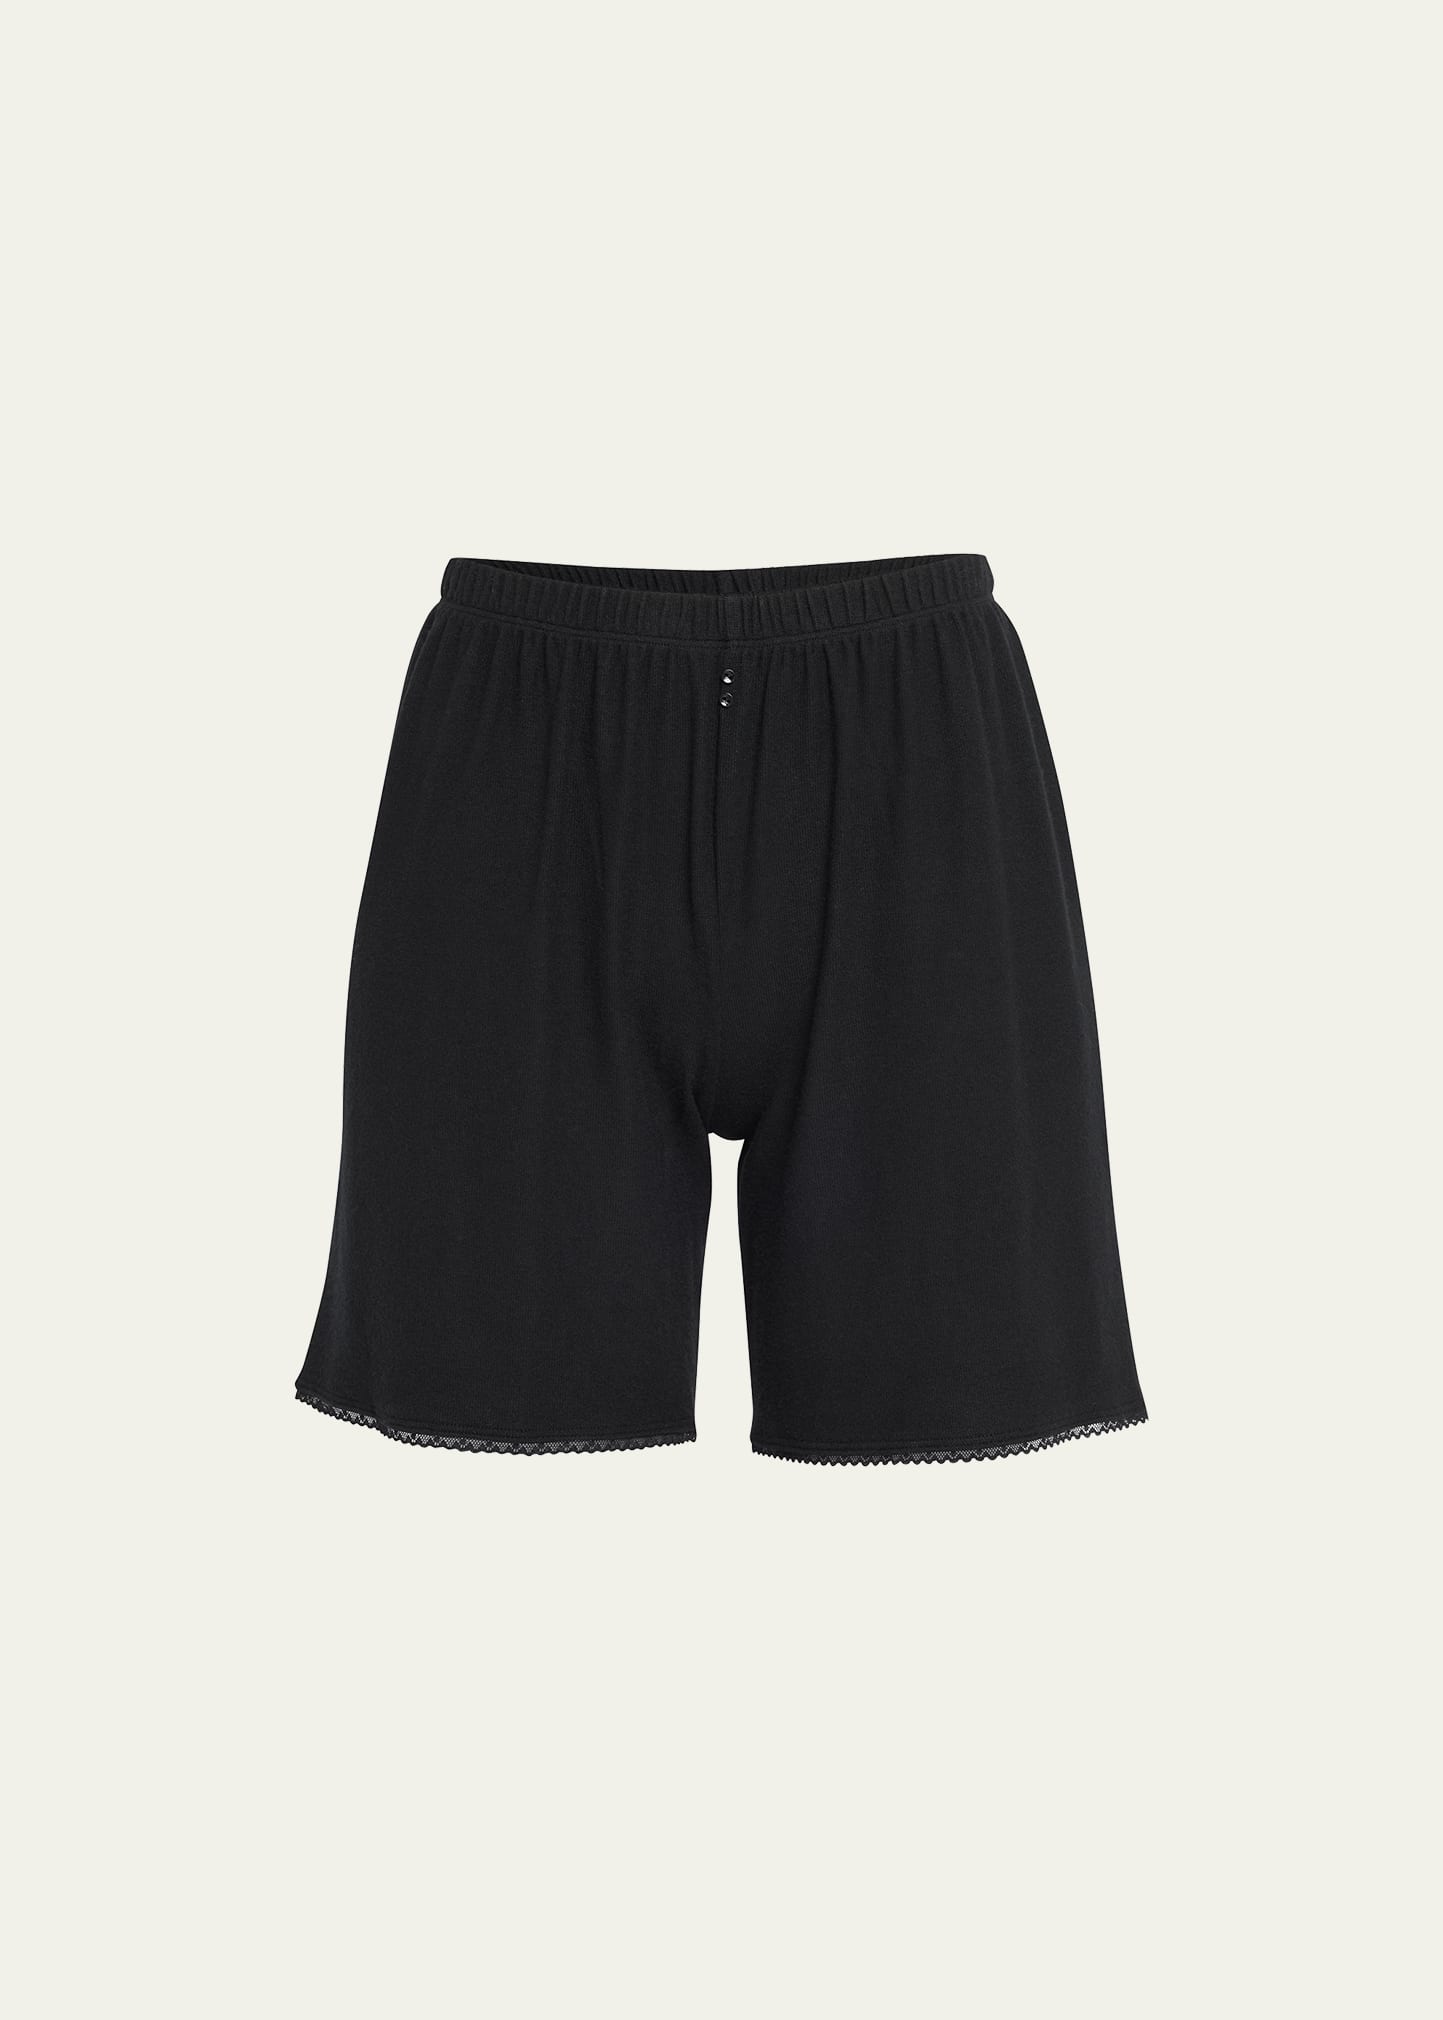 Andine River Lace-Trim Shorts